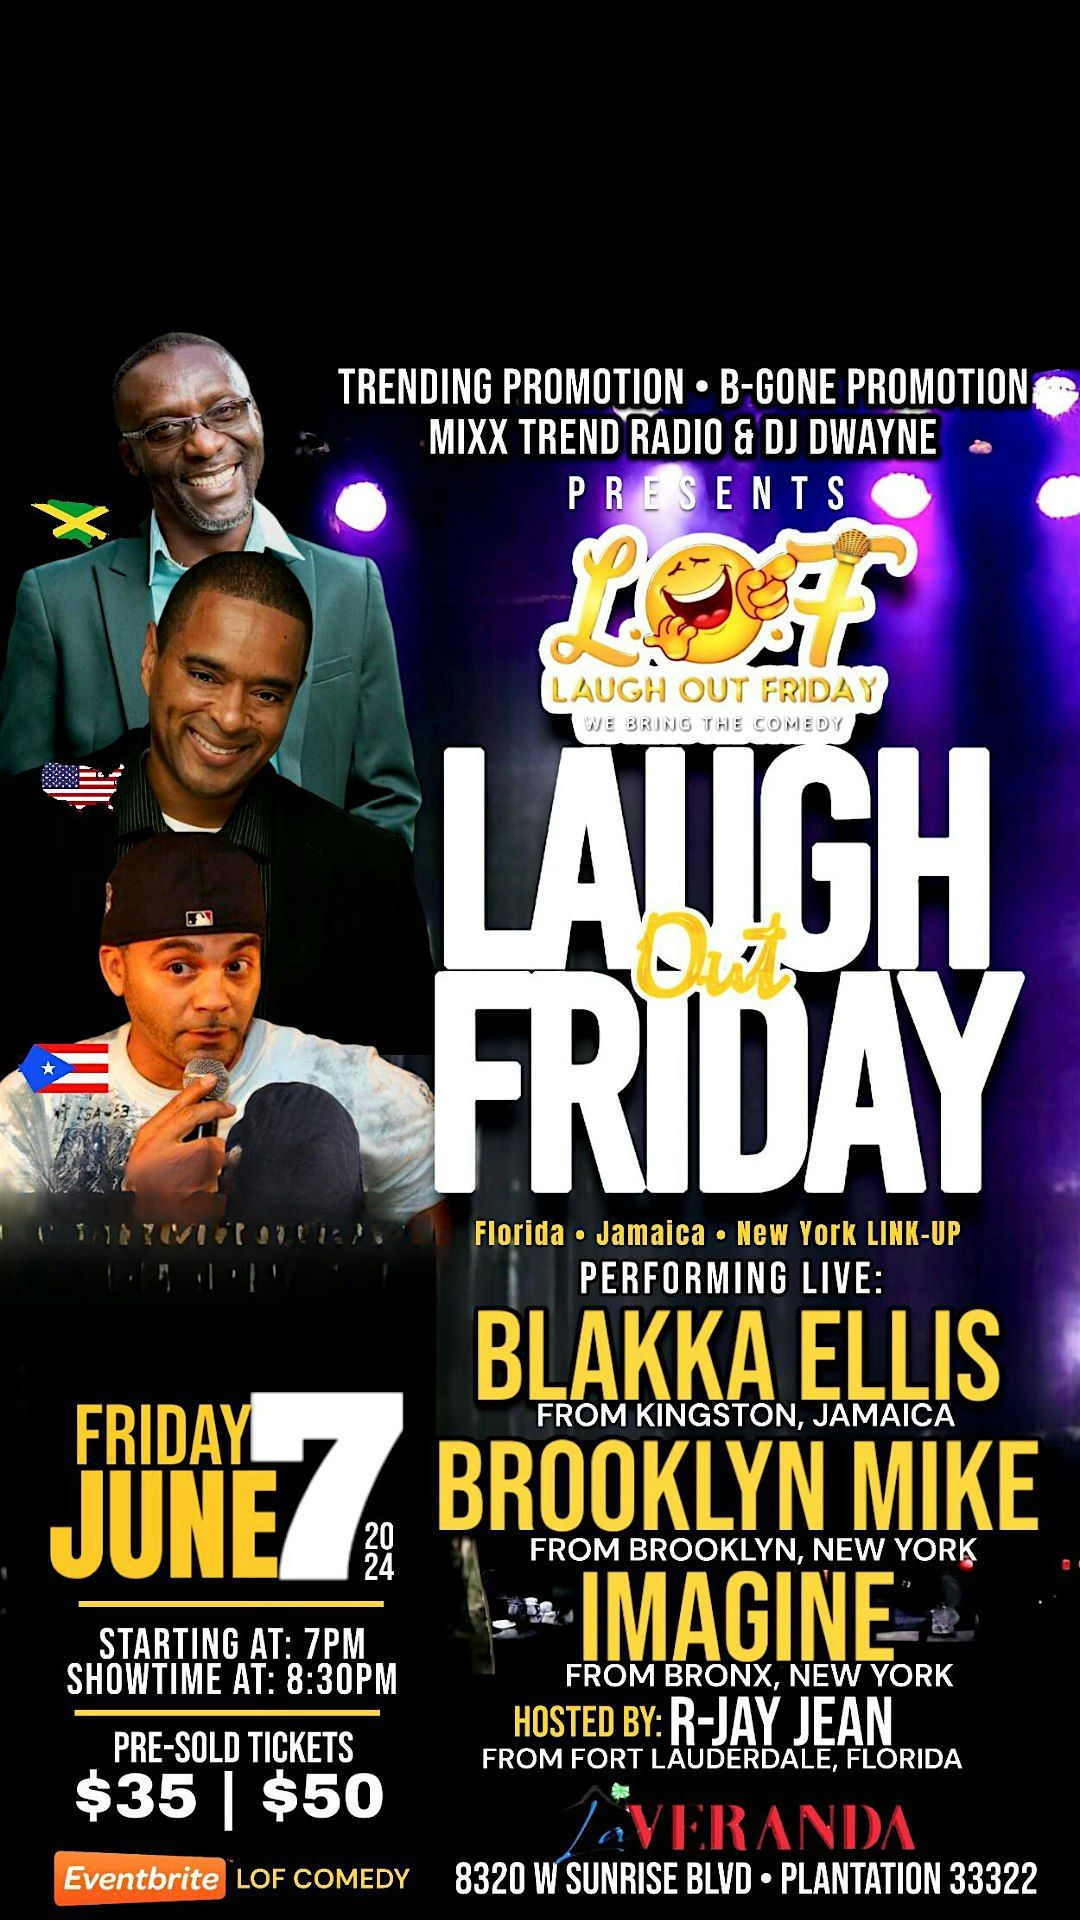 Laugh Out Friday "LOF" - Florida : Jamaica : New York : Link-Up